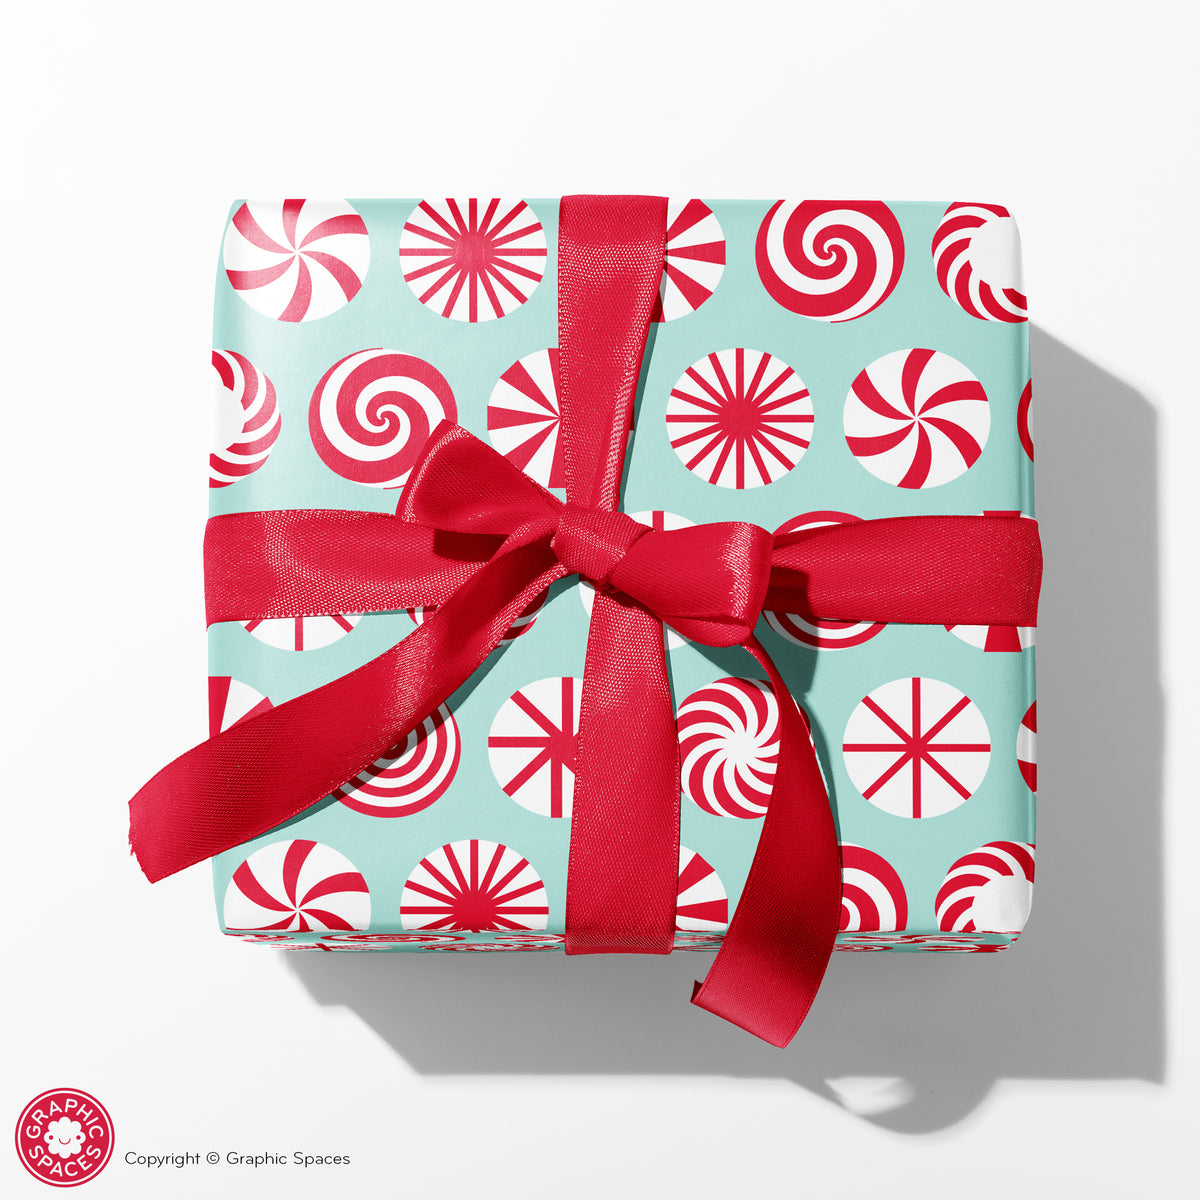 Peppermint Candy Christmas Wrapping Paper - RED